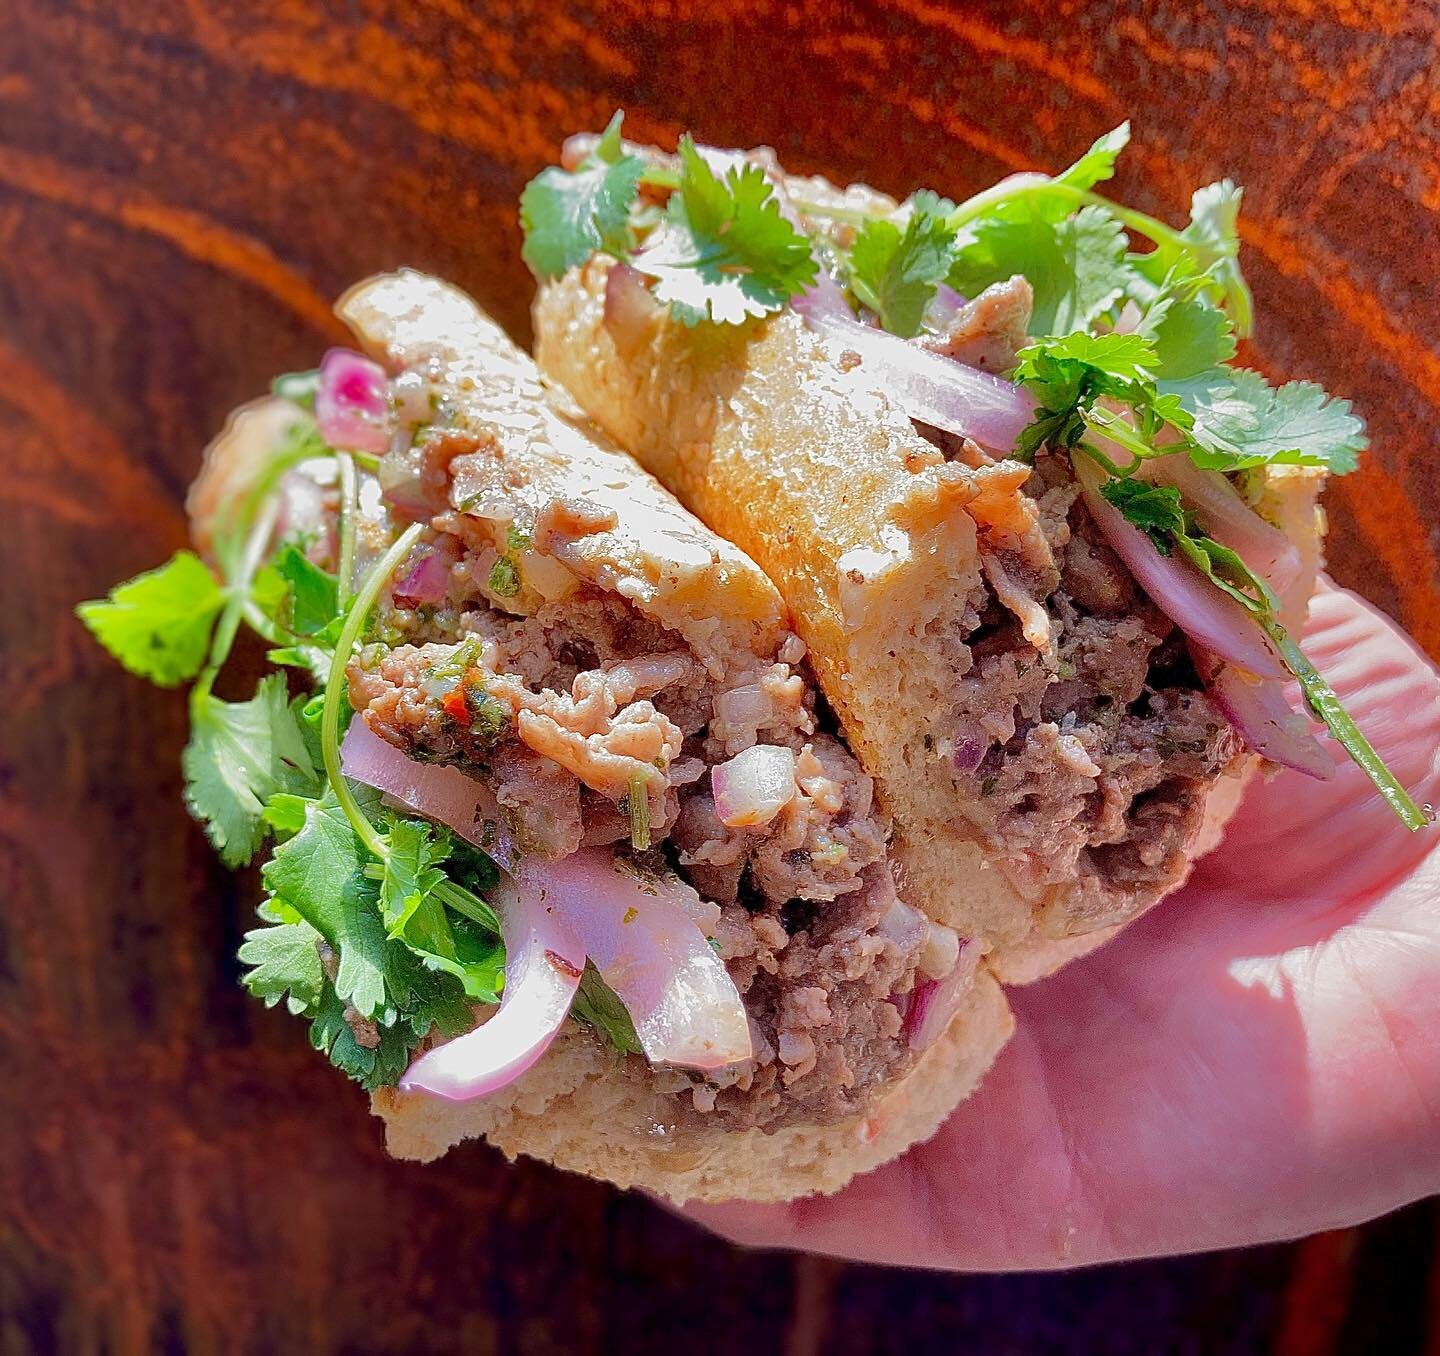 El Gaucho is back! Hands down one of our favorite riffs on the cheesesteak. A nod to beefy Argentinian flavors...we spice it up with chimichurri, pepperjack, fresh cilantro, and of course our pickled red onions. Make sure you lasso one of these up be